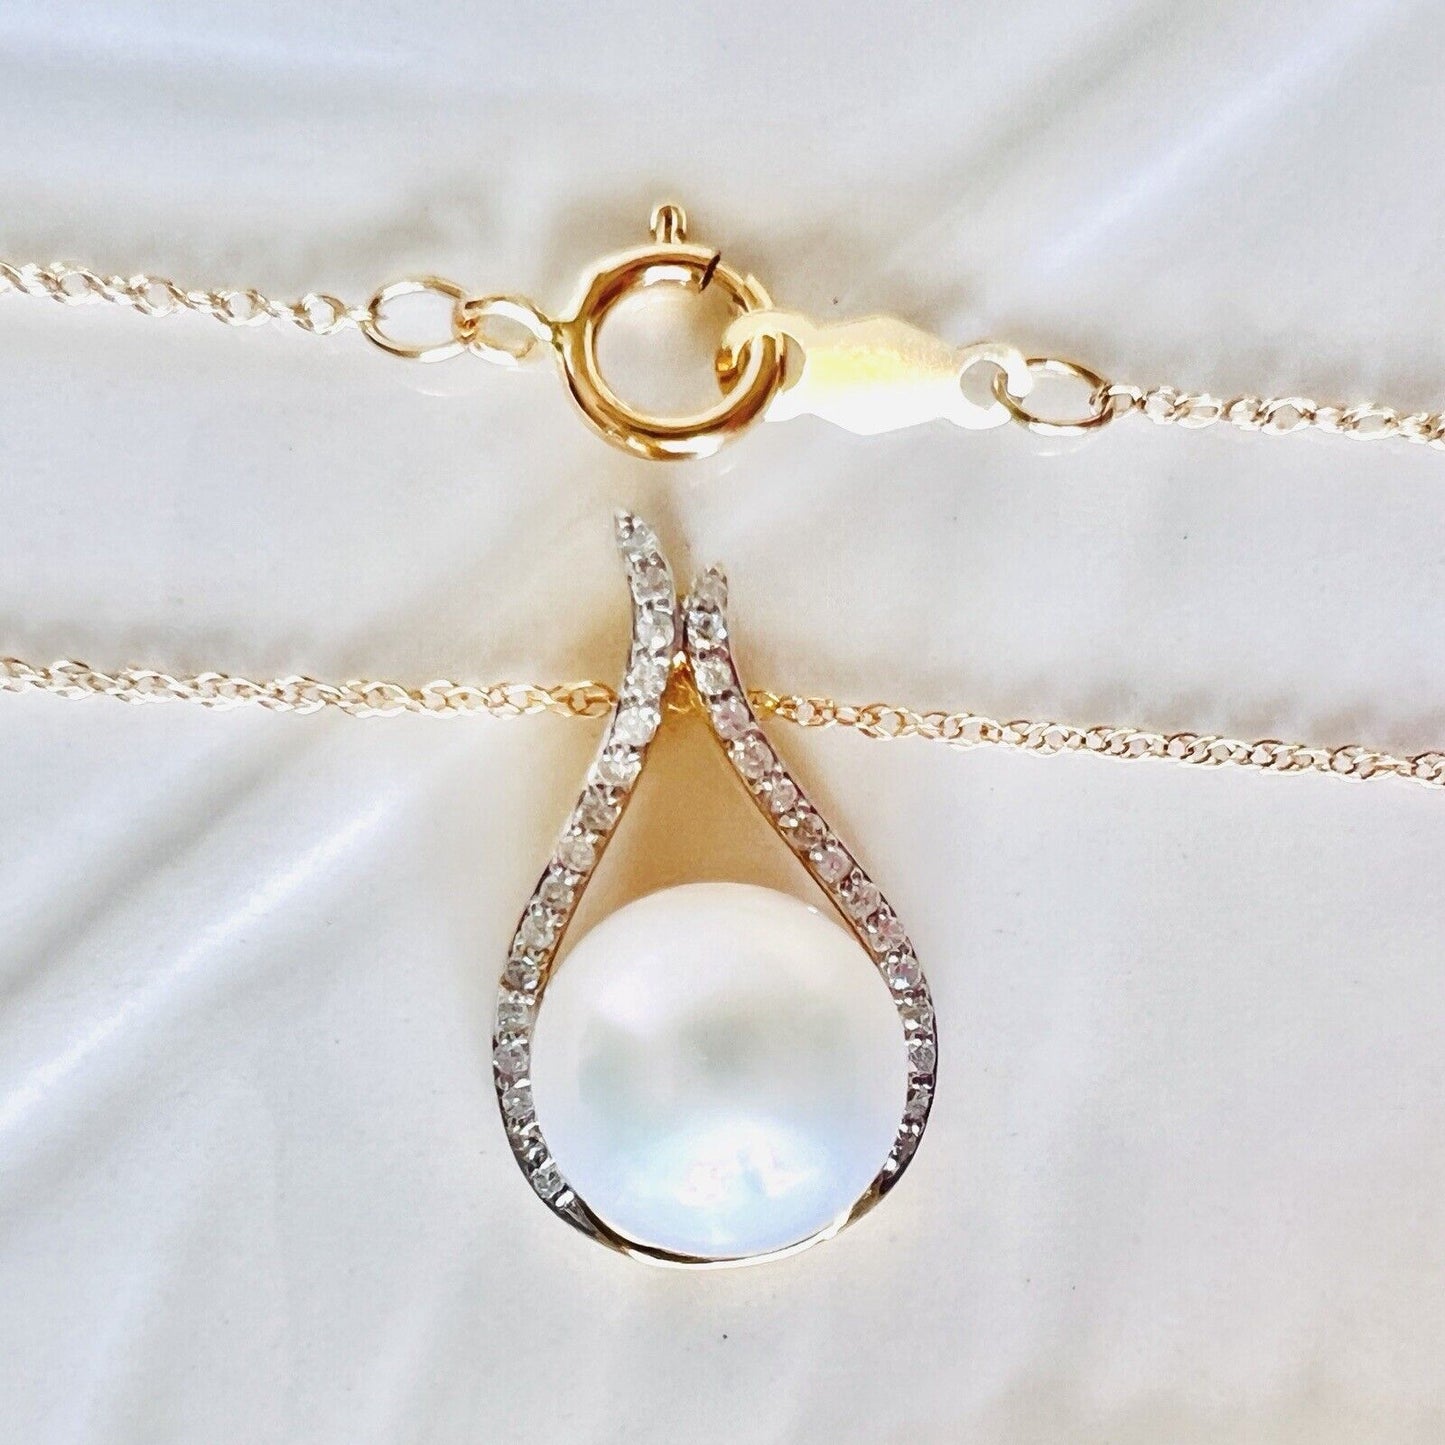 Solid 14k Yellow Gold Genuine Pearl and Diamond Pendant Necklace, New 18”